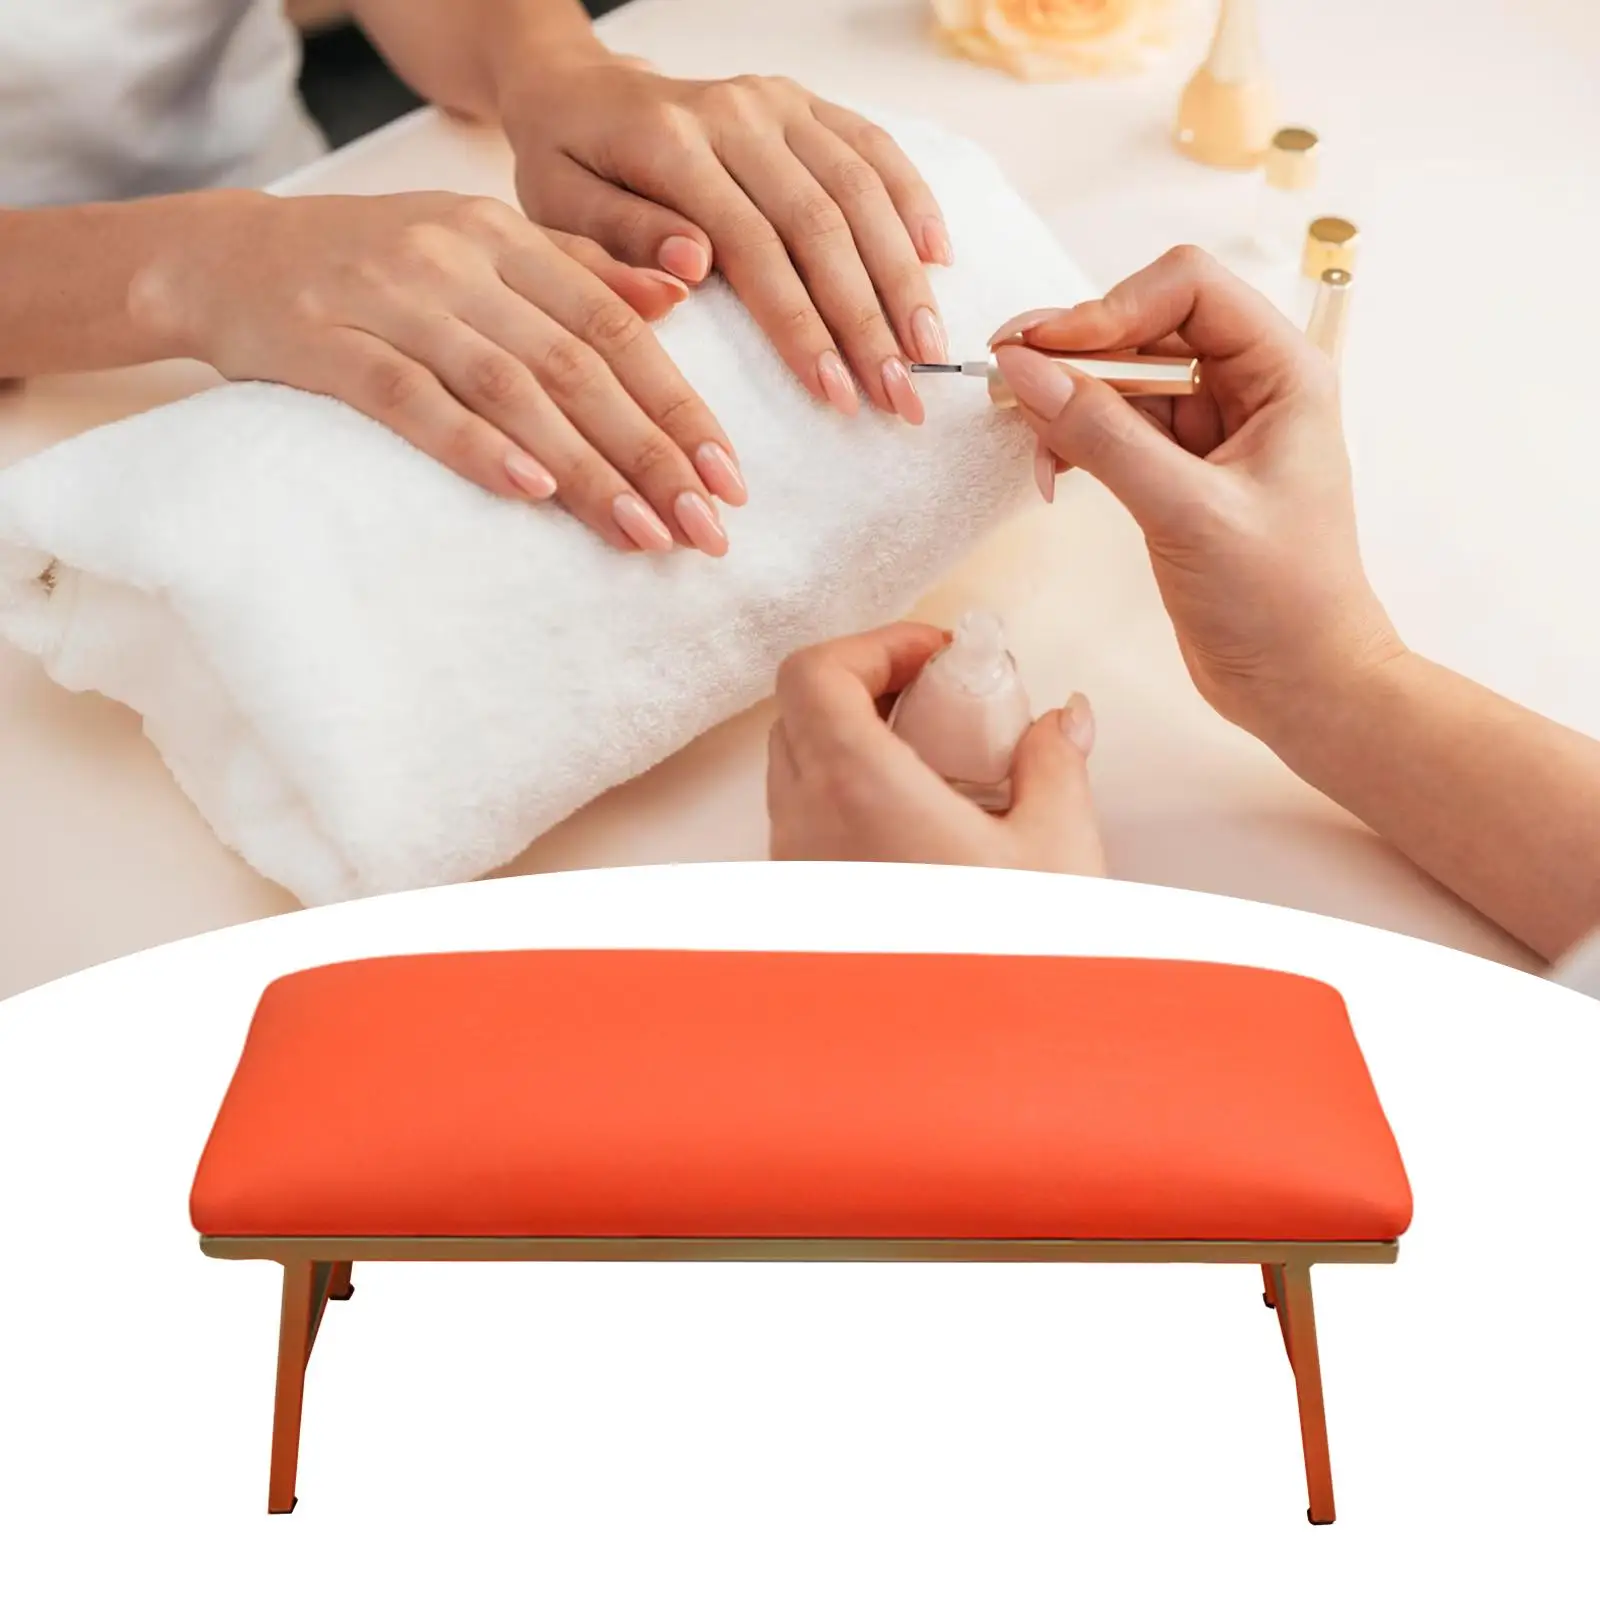 Nail Arm Rest PU Leather Professional Table Accessories Manicure Hand Pillow for Manicurist Hand Nail Technician Use Arm